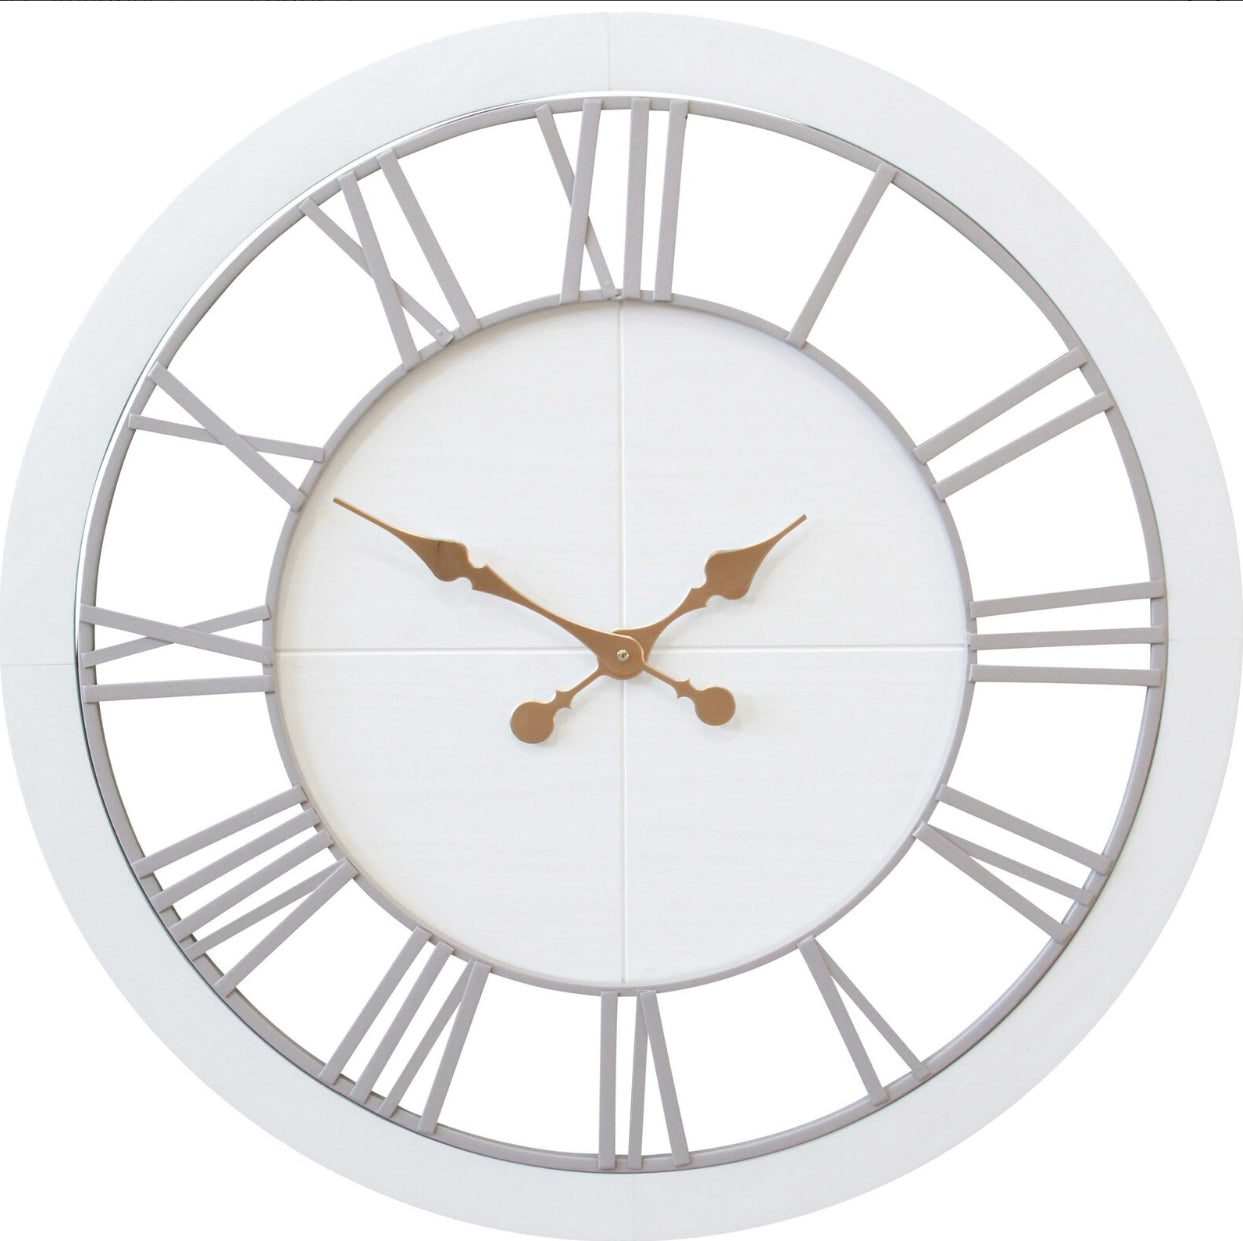 Large White Wooden Clock with Roman Numerals